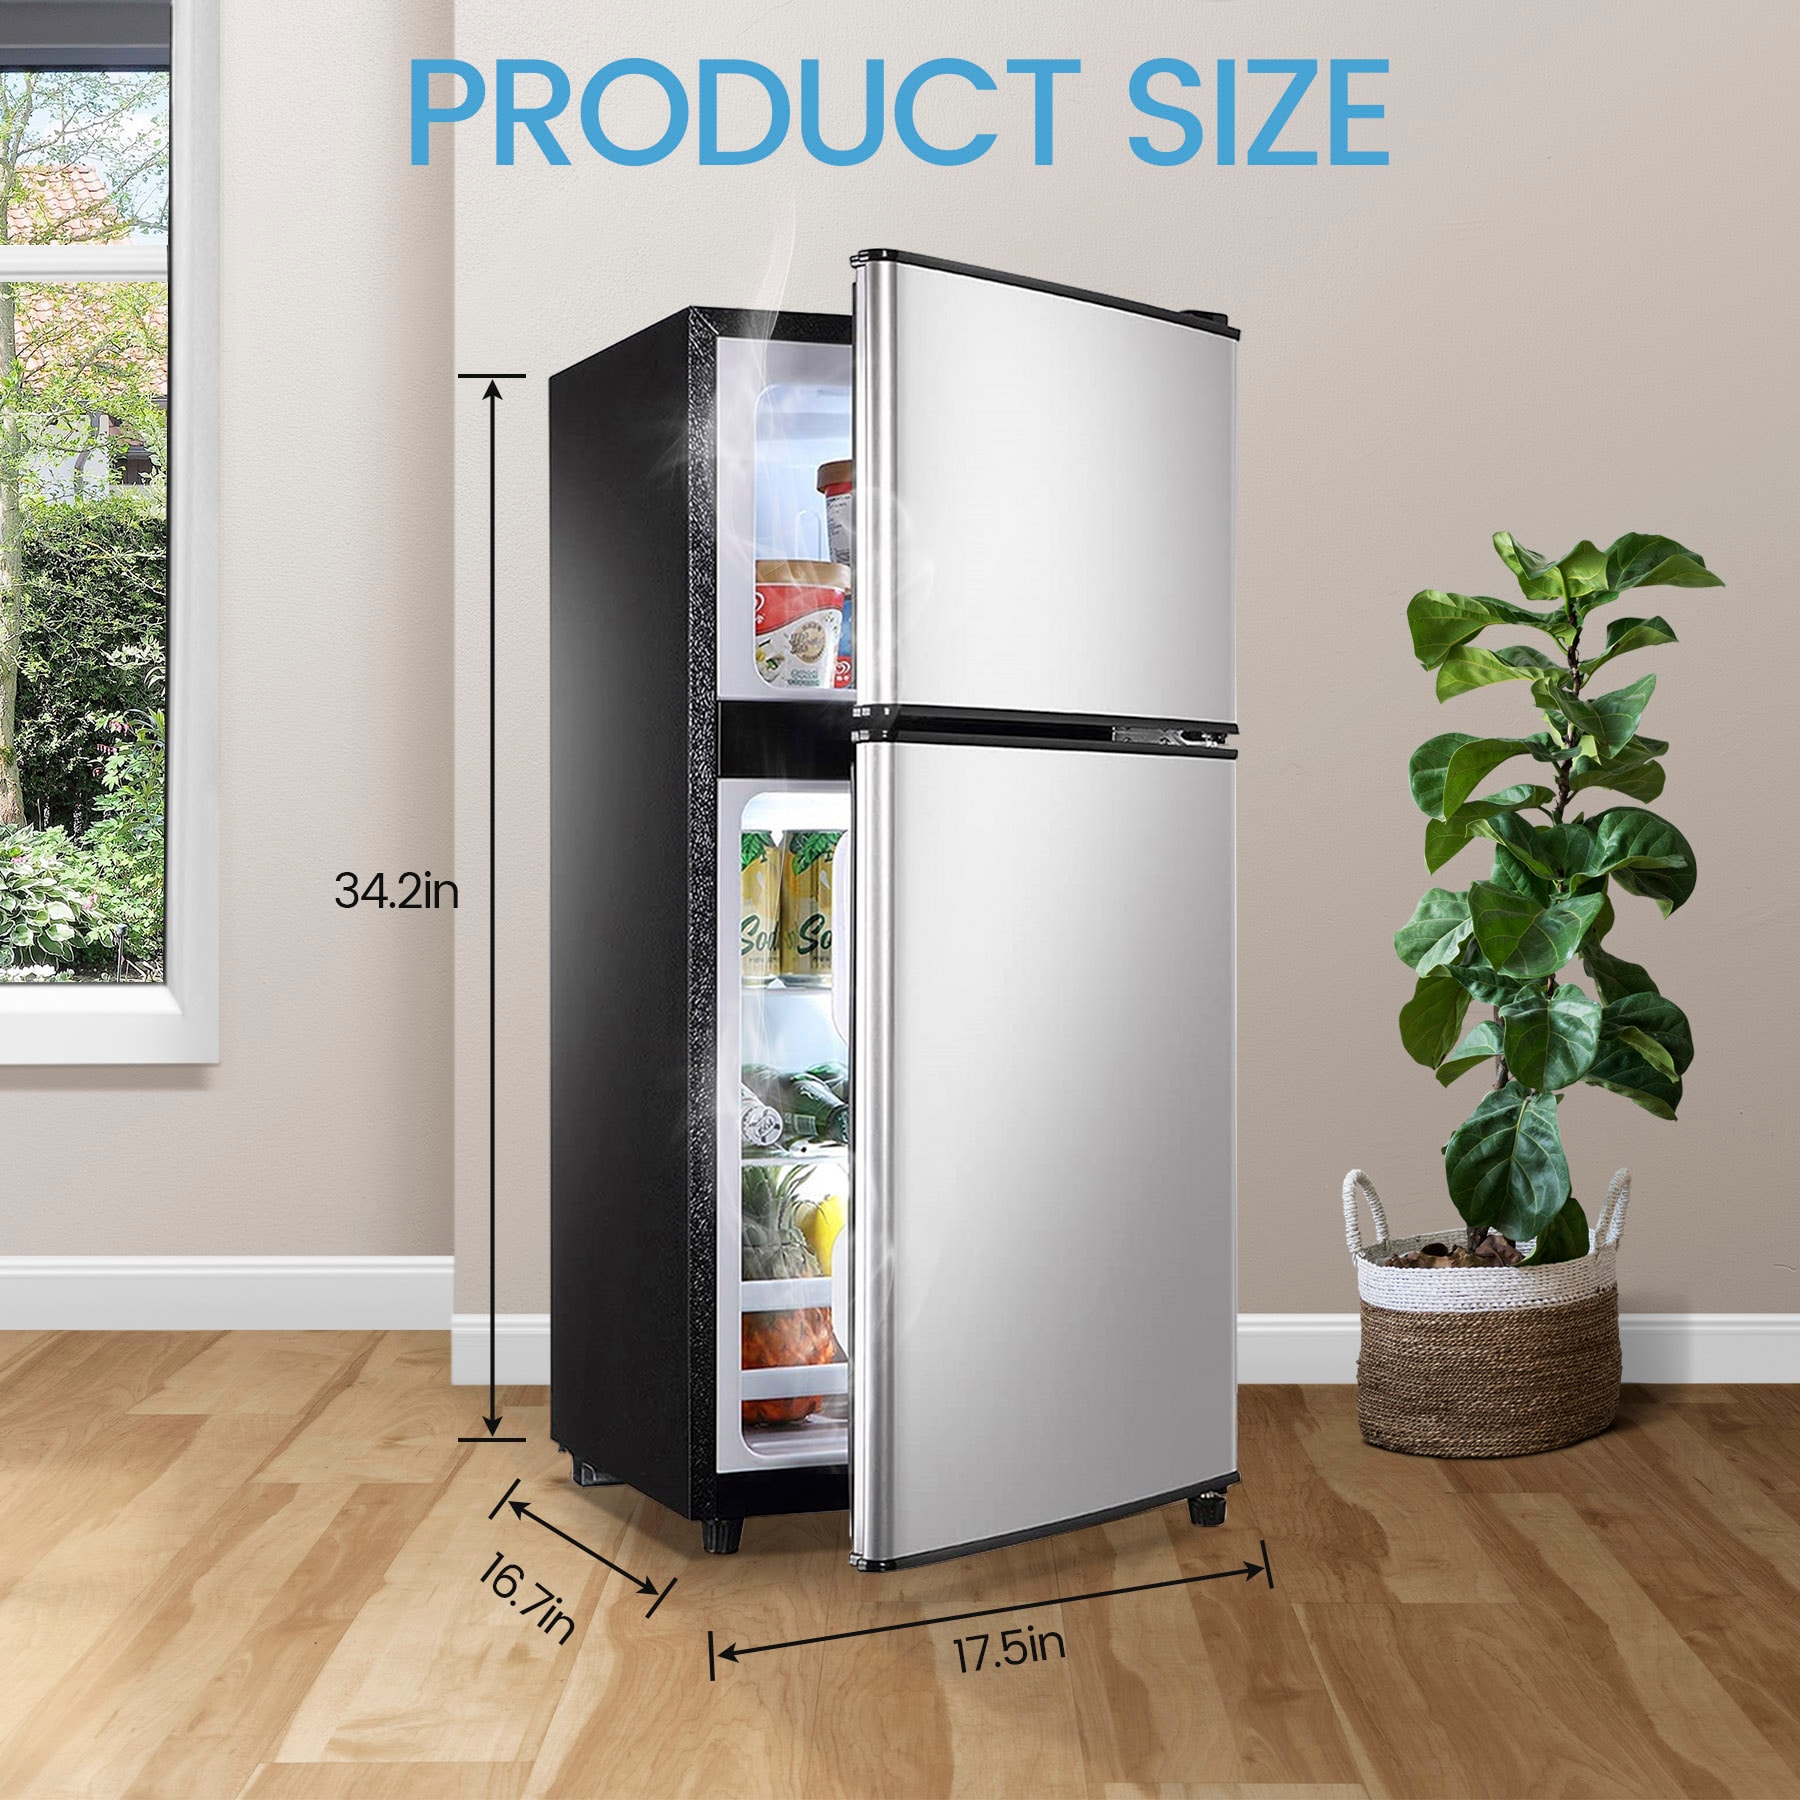  Fcicarn 3.5 Cu. Ft. Compact Refrigerator, Featuring a Separate  Freezer Compartment, Lock, 7-Level Thermostat and Vintage-Inspired Styling  for Small Kitchens, Home Offices or Dorm Rooms, Black : Appliances